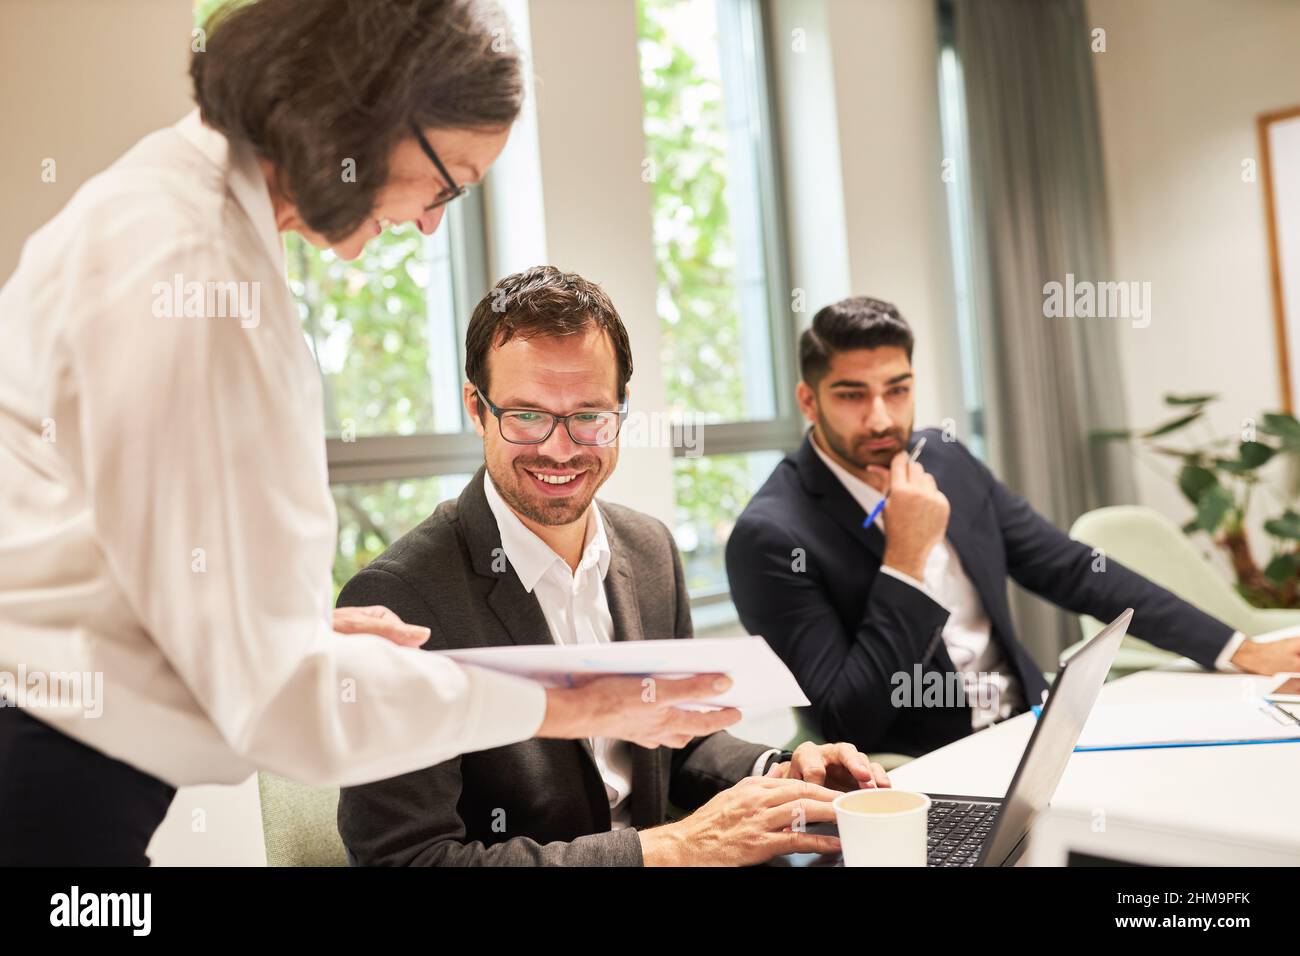 Consulting woman or boss works together with trainee in a meeting or workshop Stock Photo